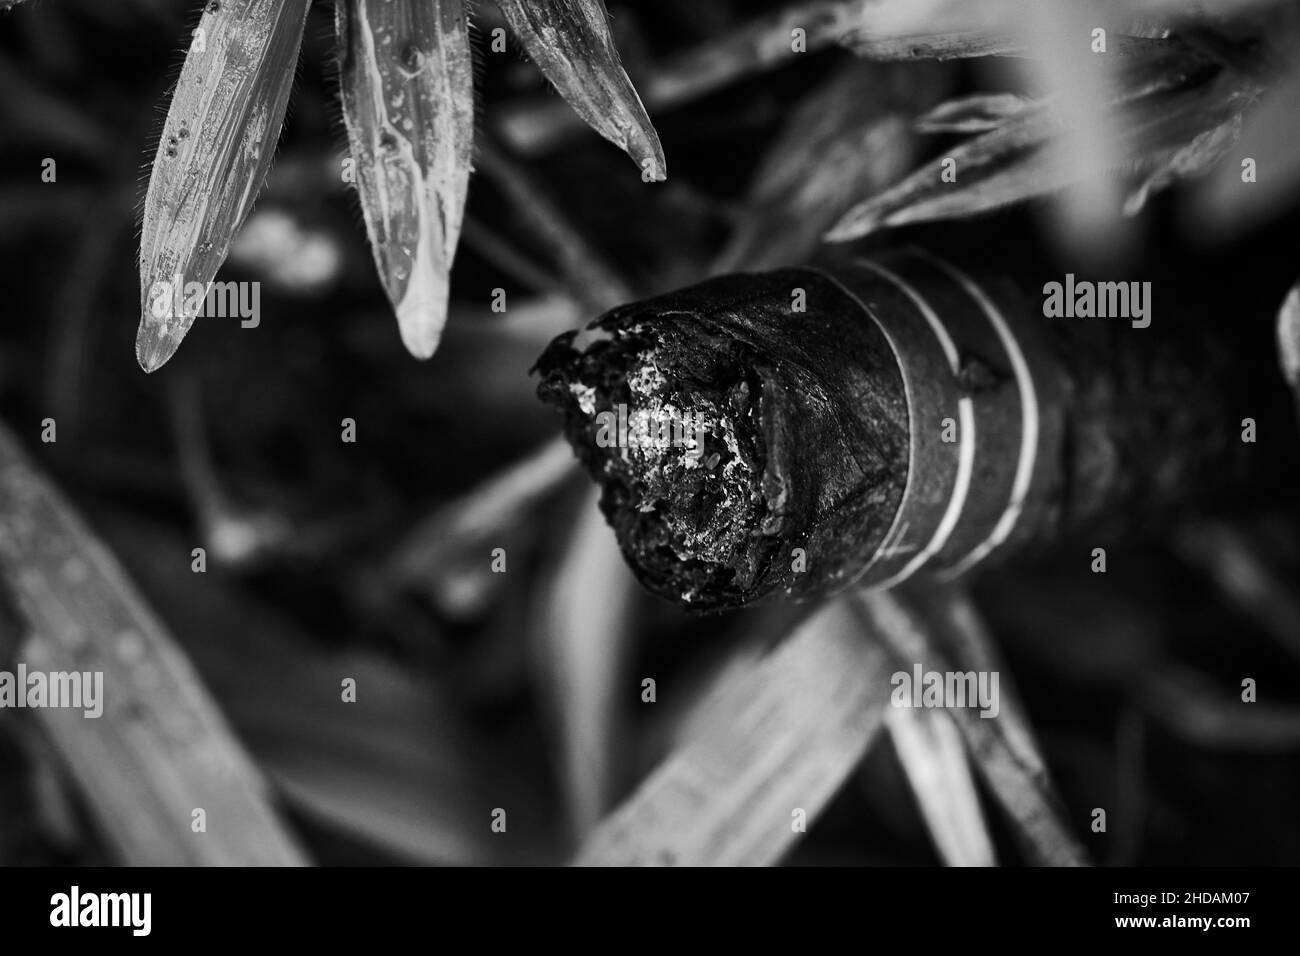 Closeup of a cigar burning tip in black and white with a blurred background of tropical leaves Stock Photo